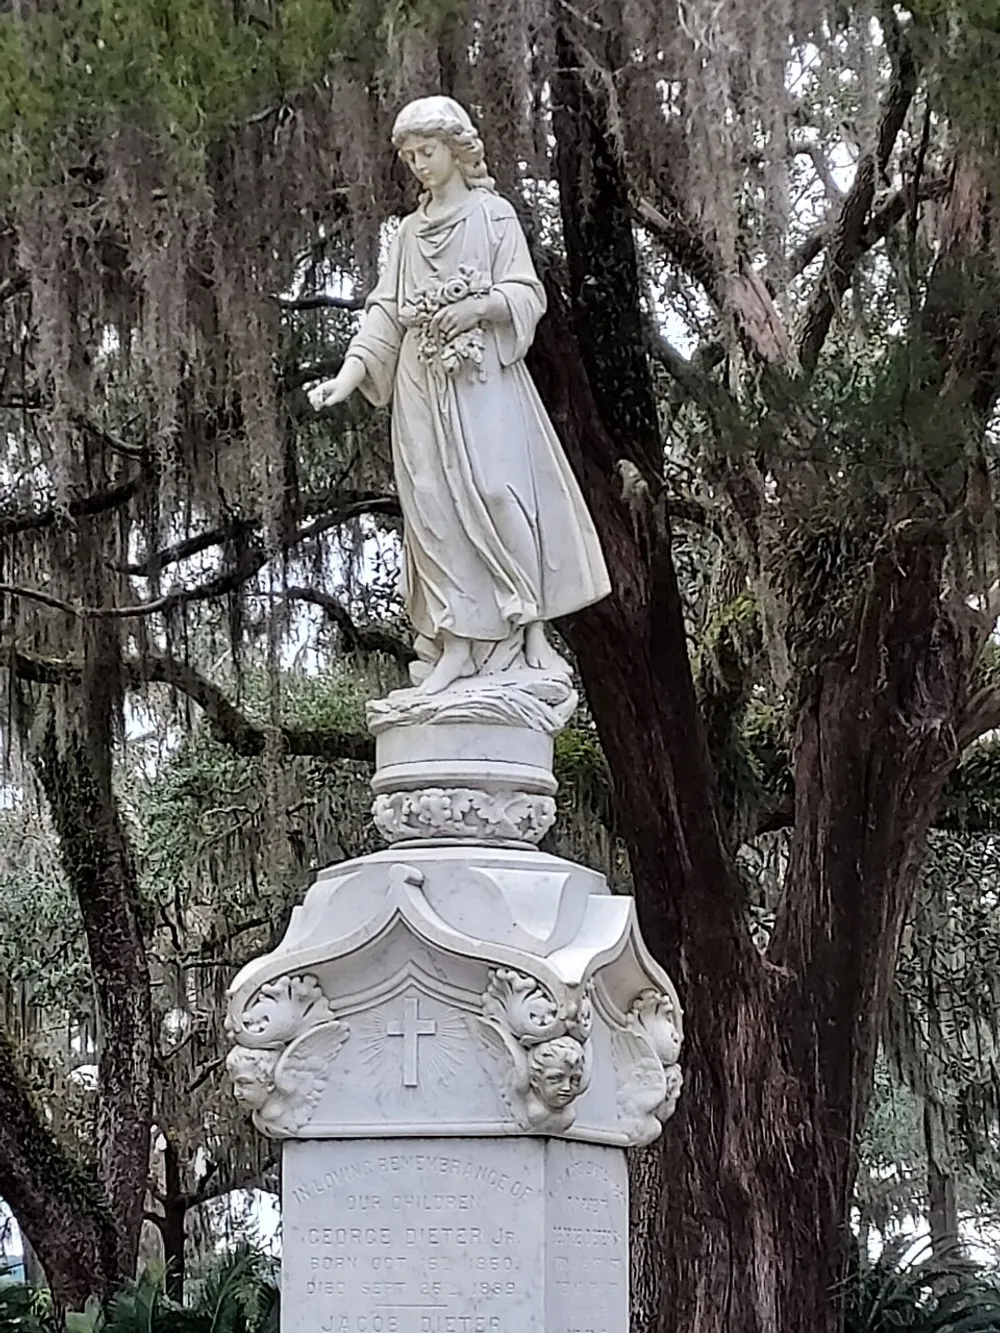 The image displays a detailed statue of a standing figure with outstretched hand positioned atop a memorial featuring cherubic faces and inscriptions all set against a backdrop of Spanish moss-draped trees